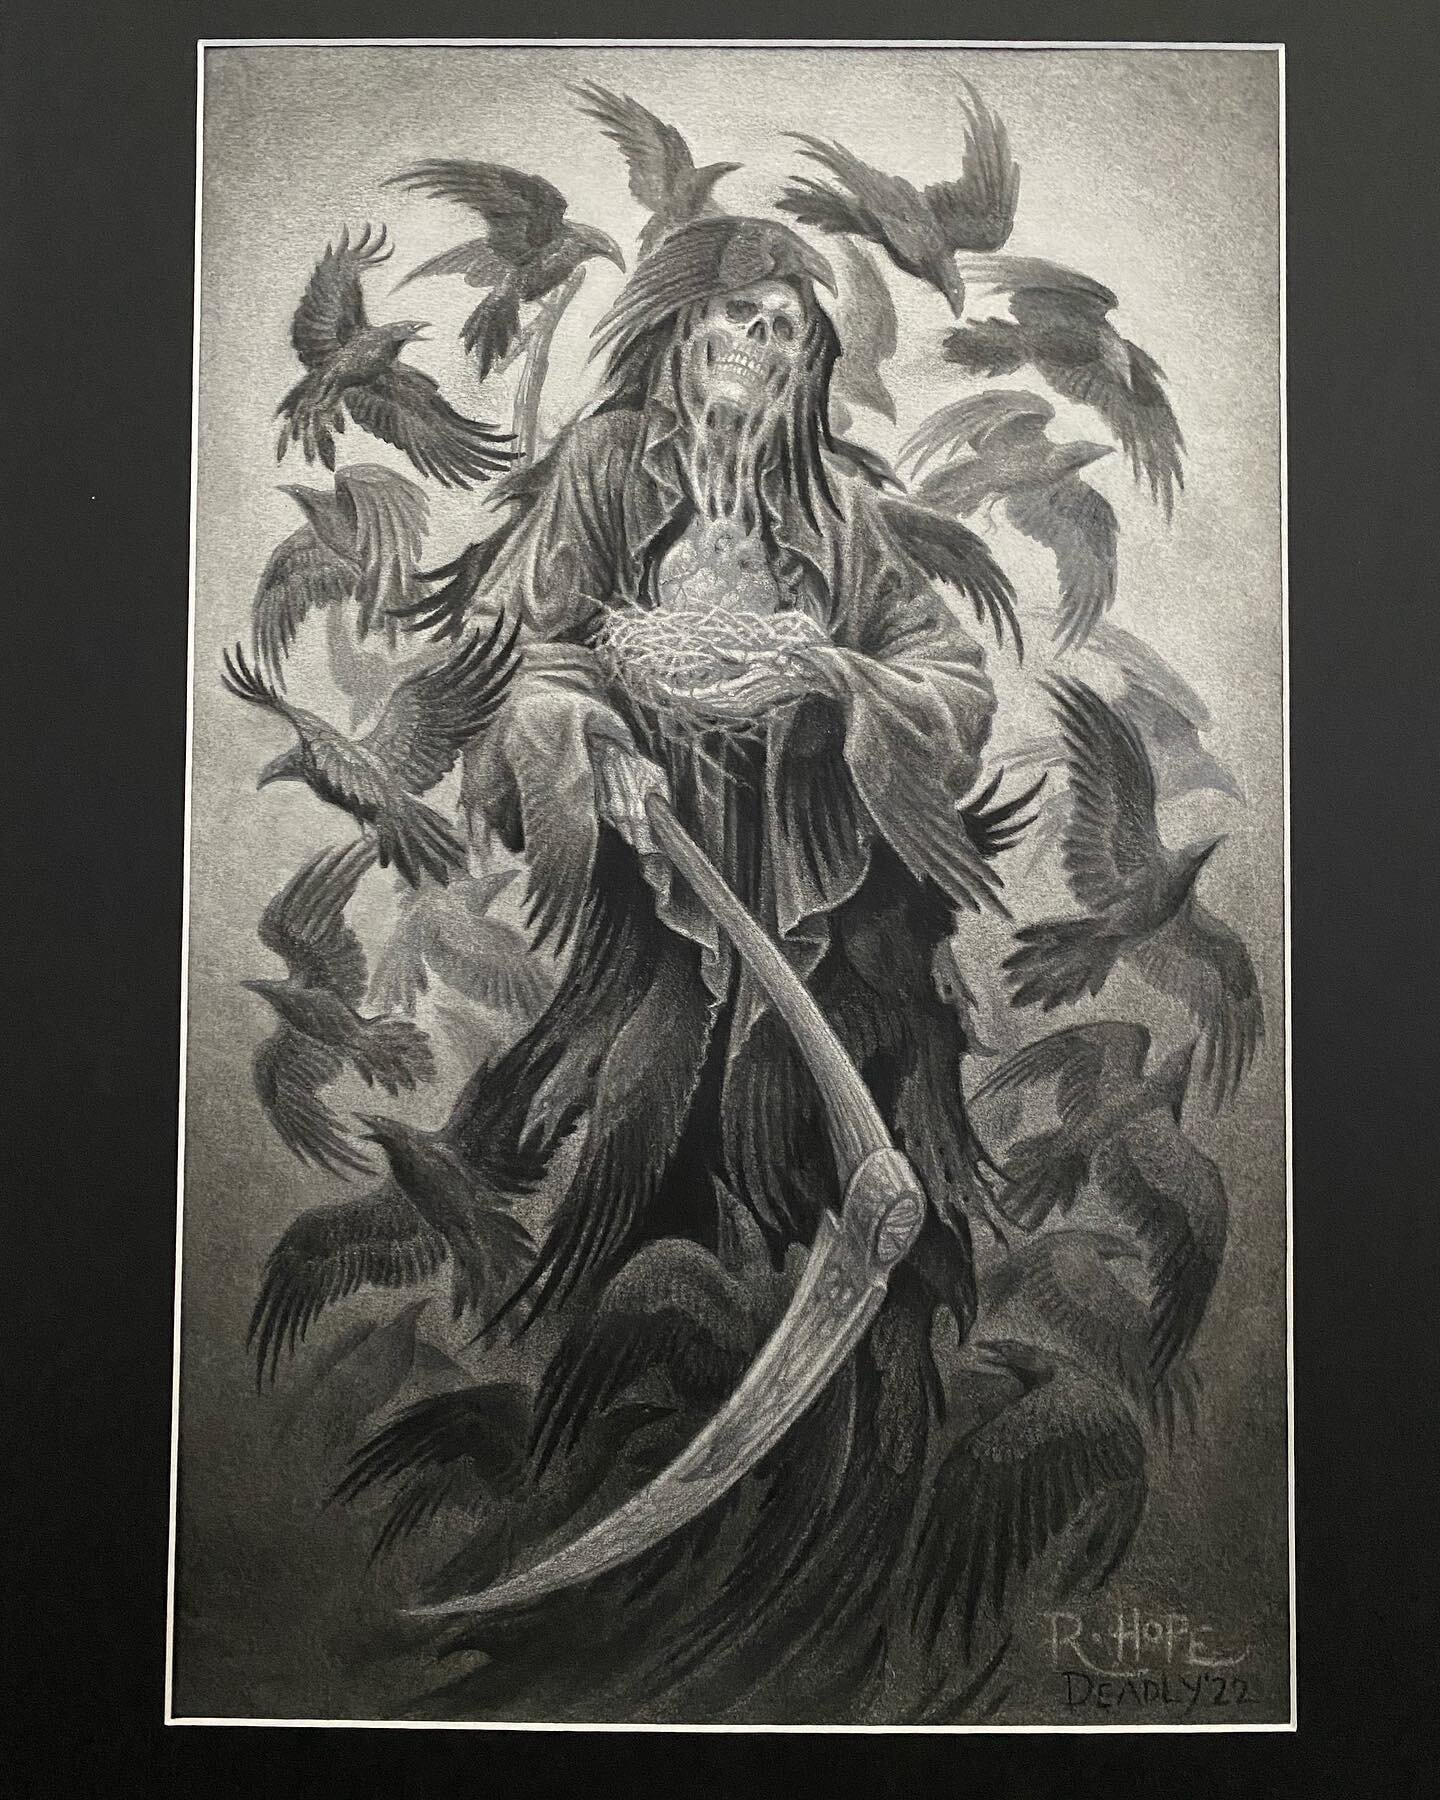 Some reaper madness for the @deadlytattooconvention &hellip; come on down and check out the art wall👍